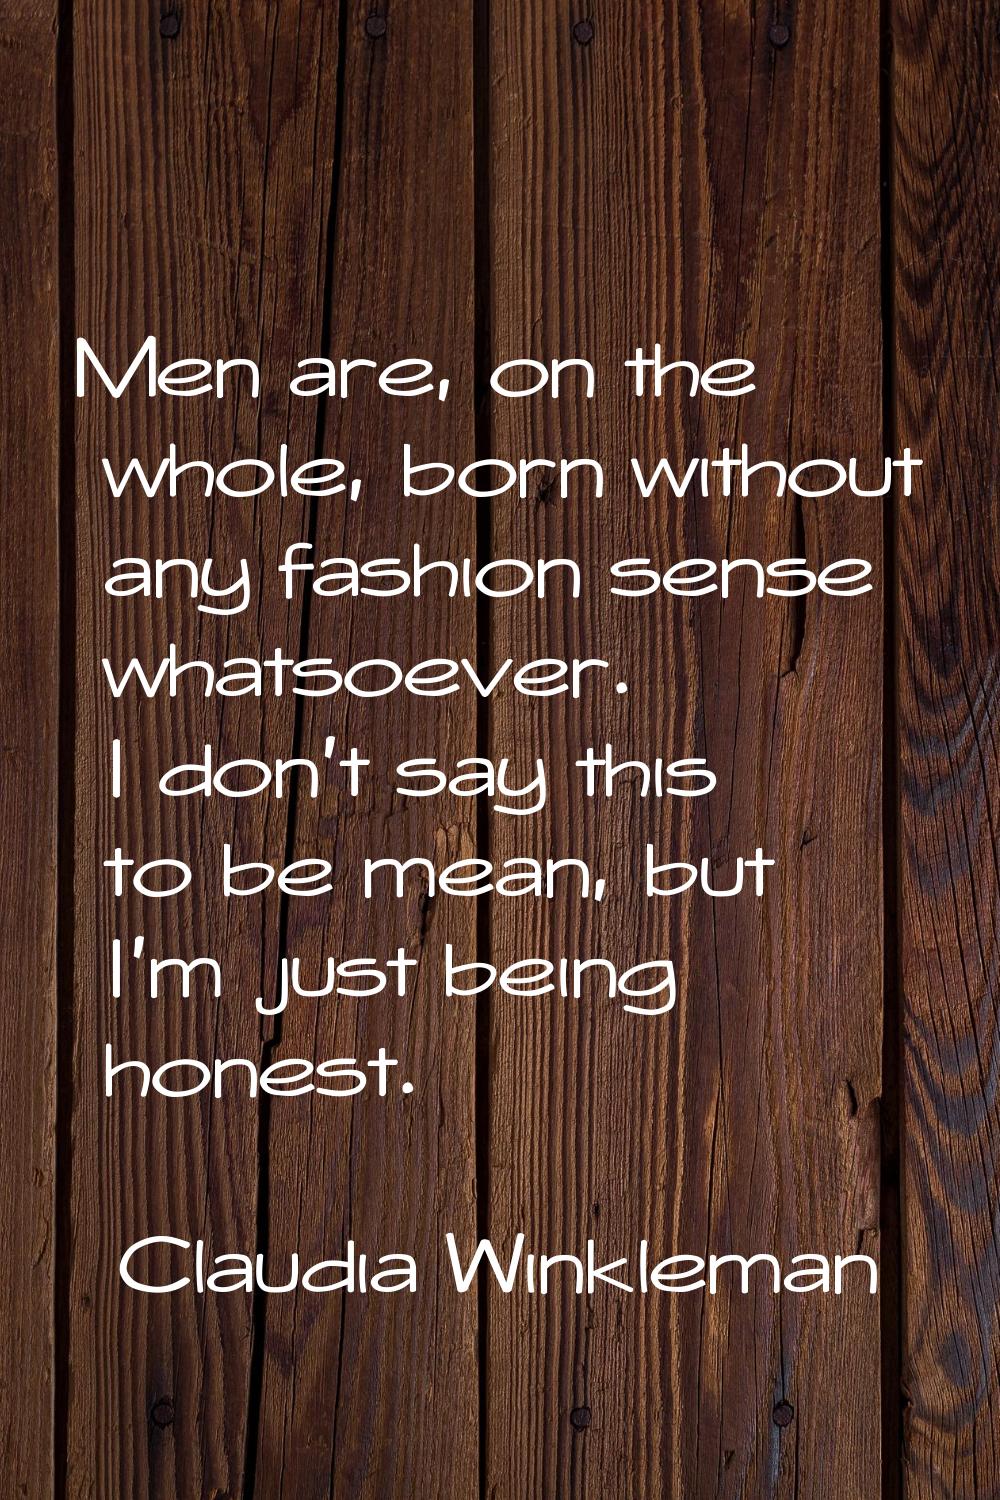 Men are, on the whole, born without any fashion sense whatsoever. I don't say this to be mean, but 